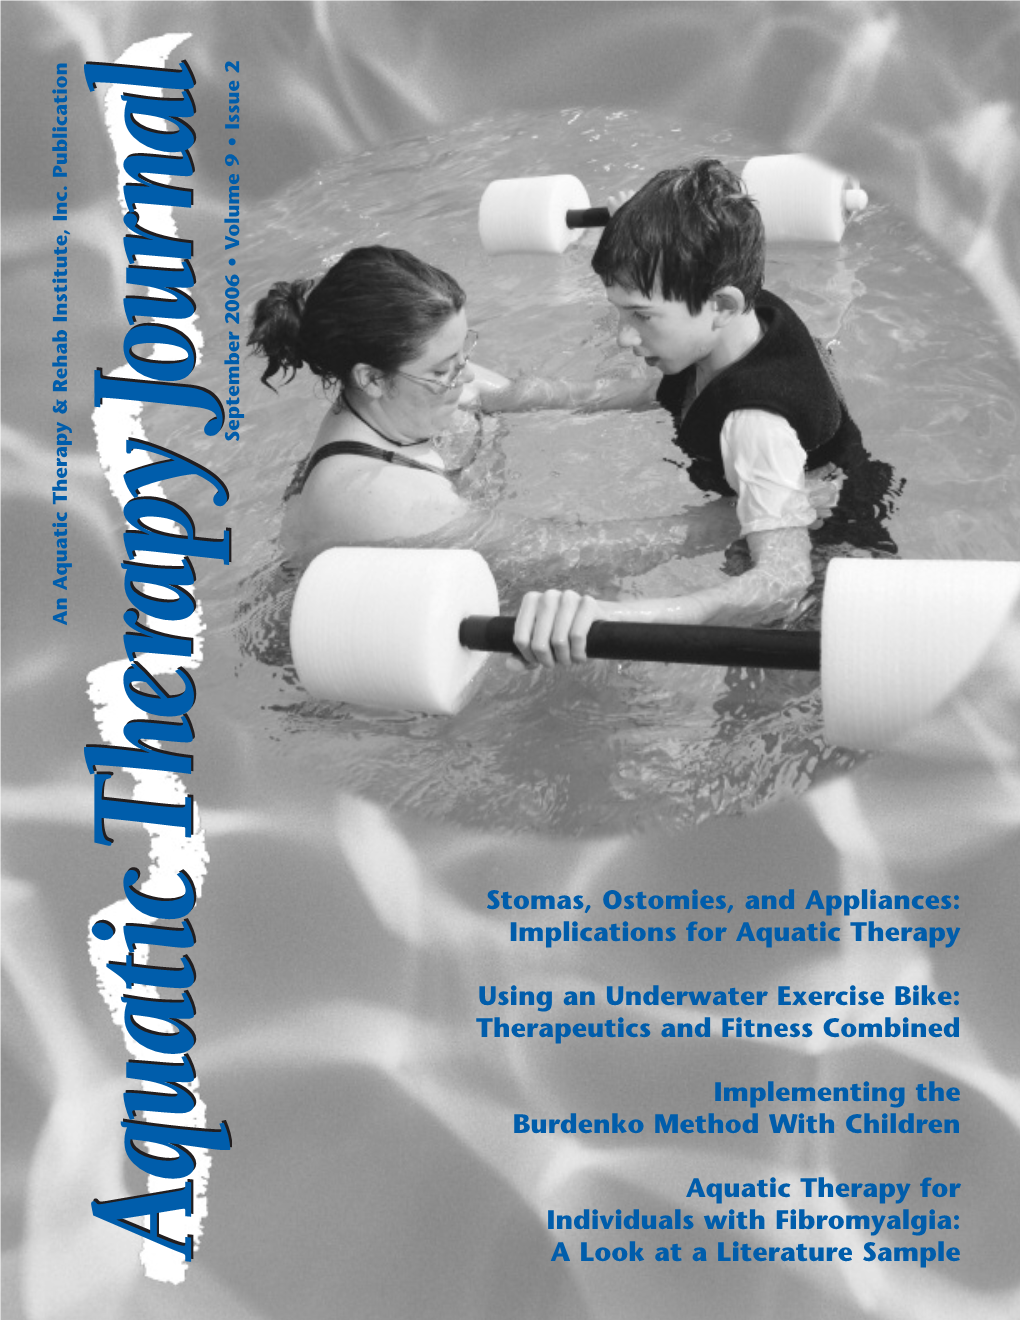 Stomas, Ostomies, and Appliances: Implications for Aquatic Therapy